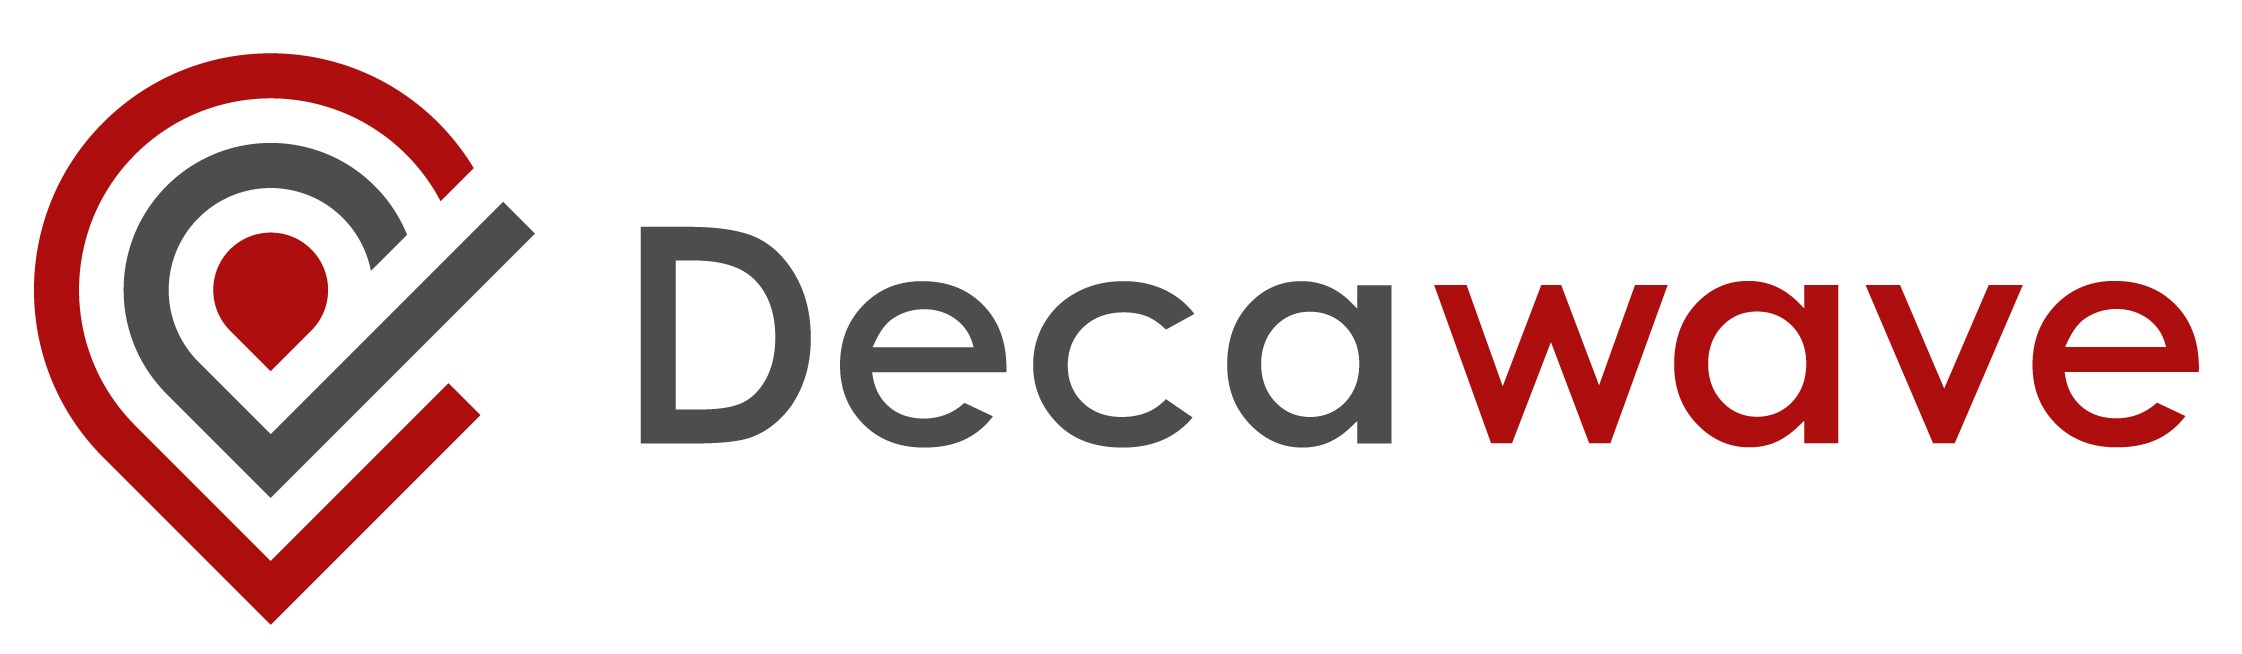 Decawave